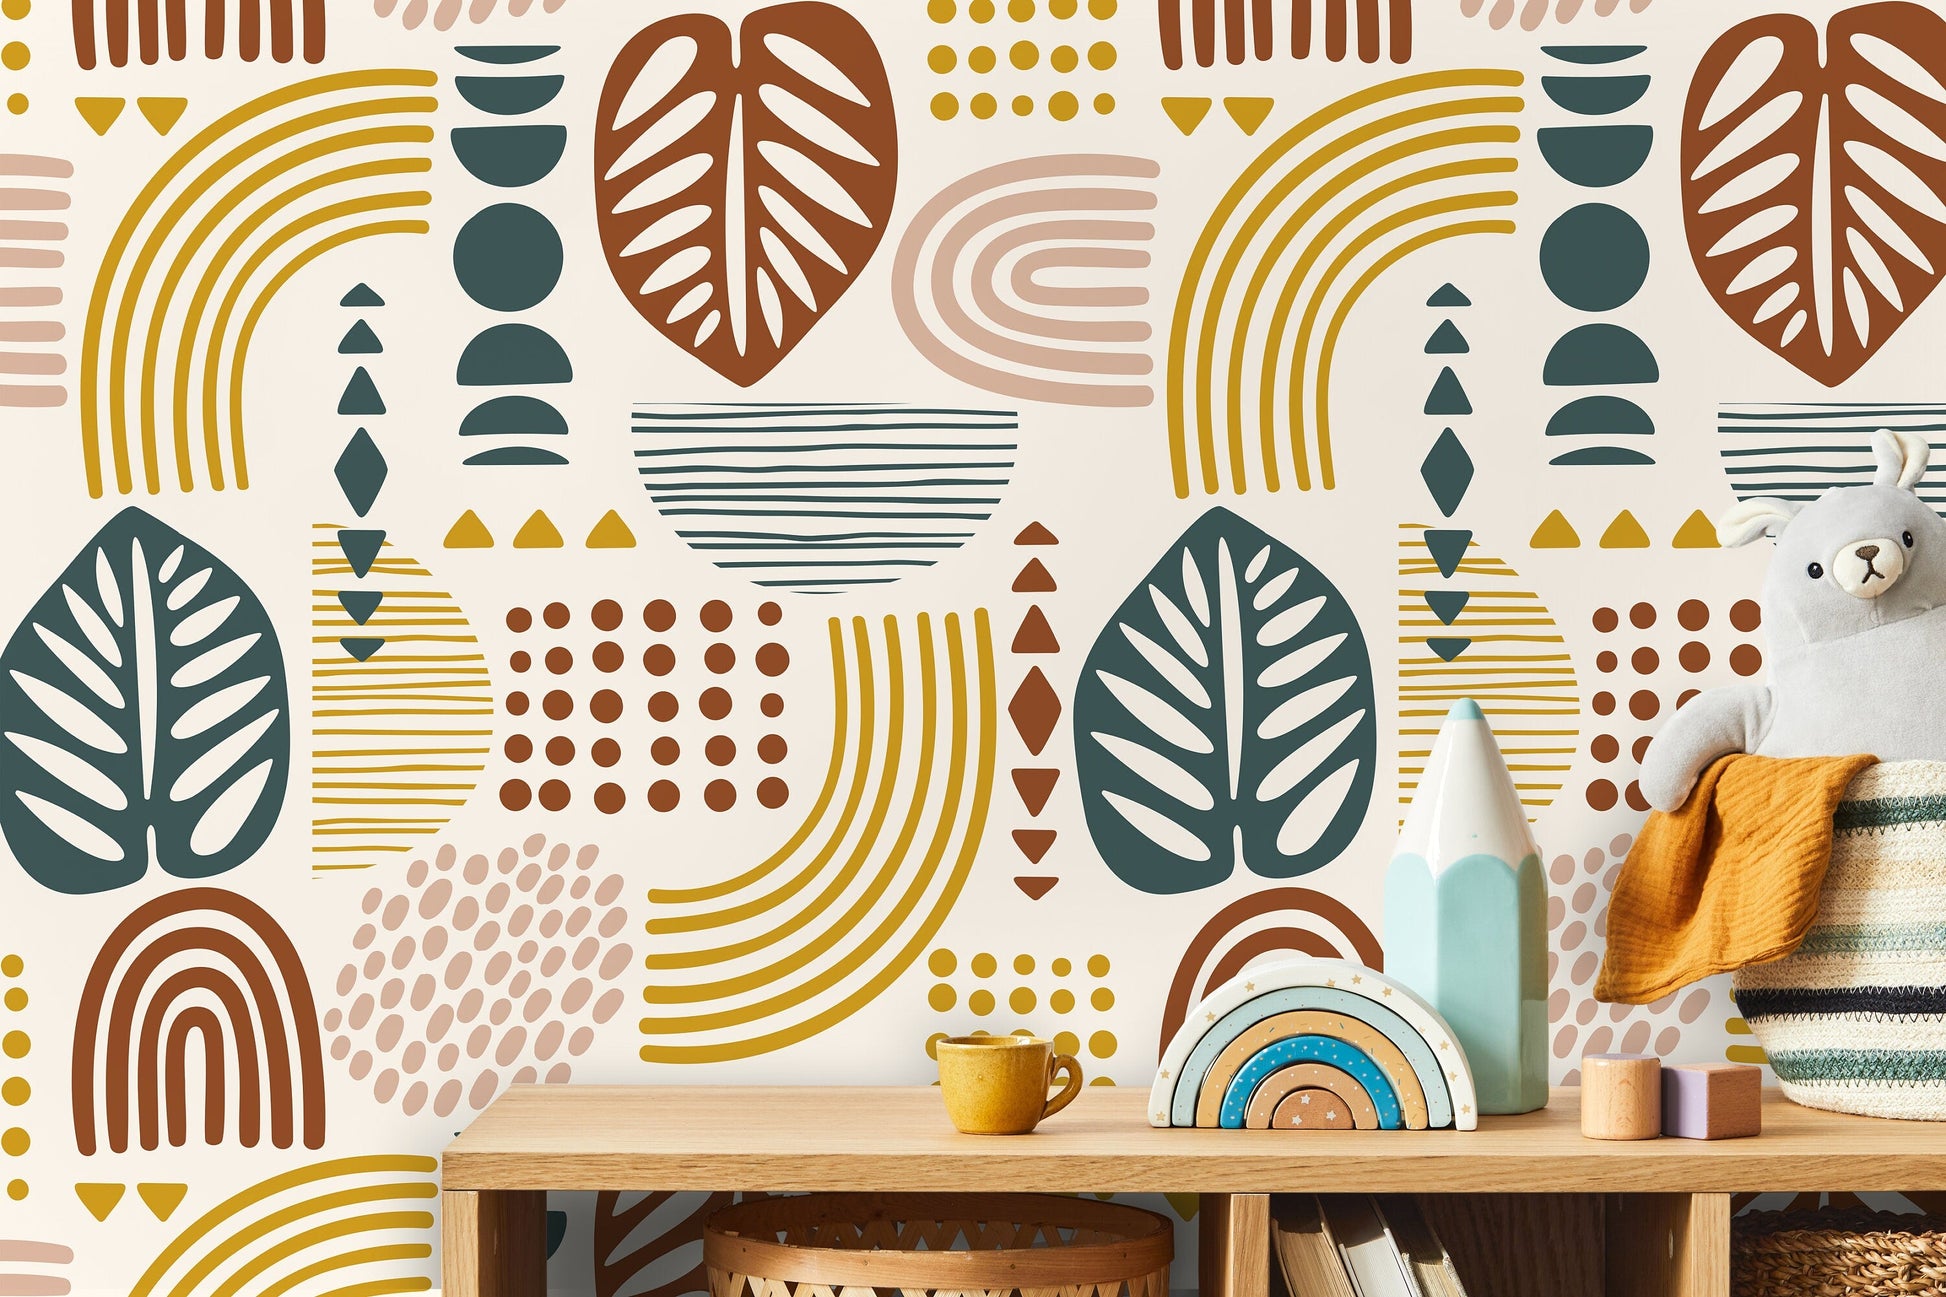 Abstract Shapes and Leaf Wallpaper / Peel and Stick Wallpaper Removable Wallpaper Home Decor Wall Art Wall Decor Room Decor - C735